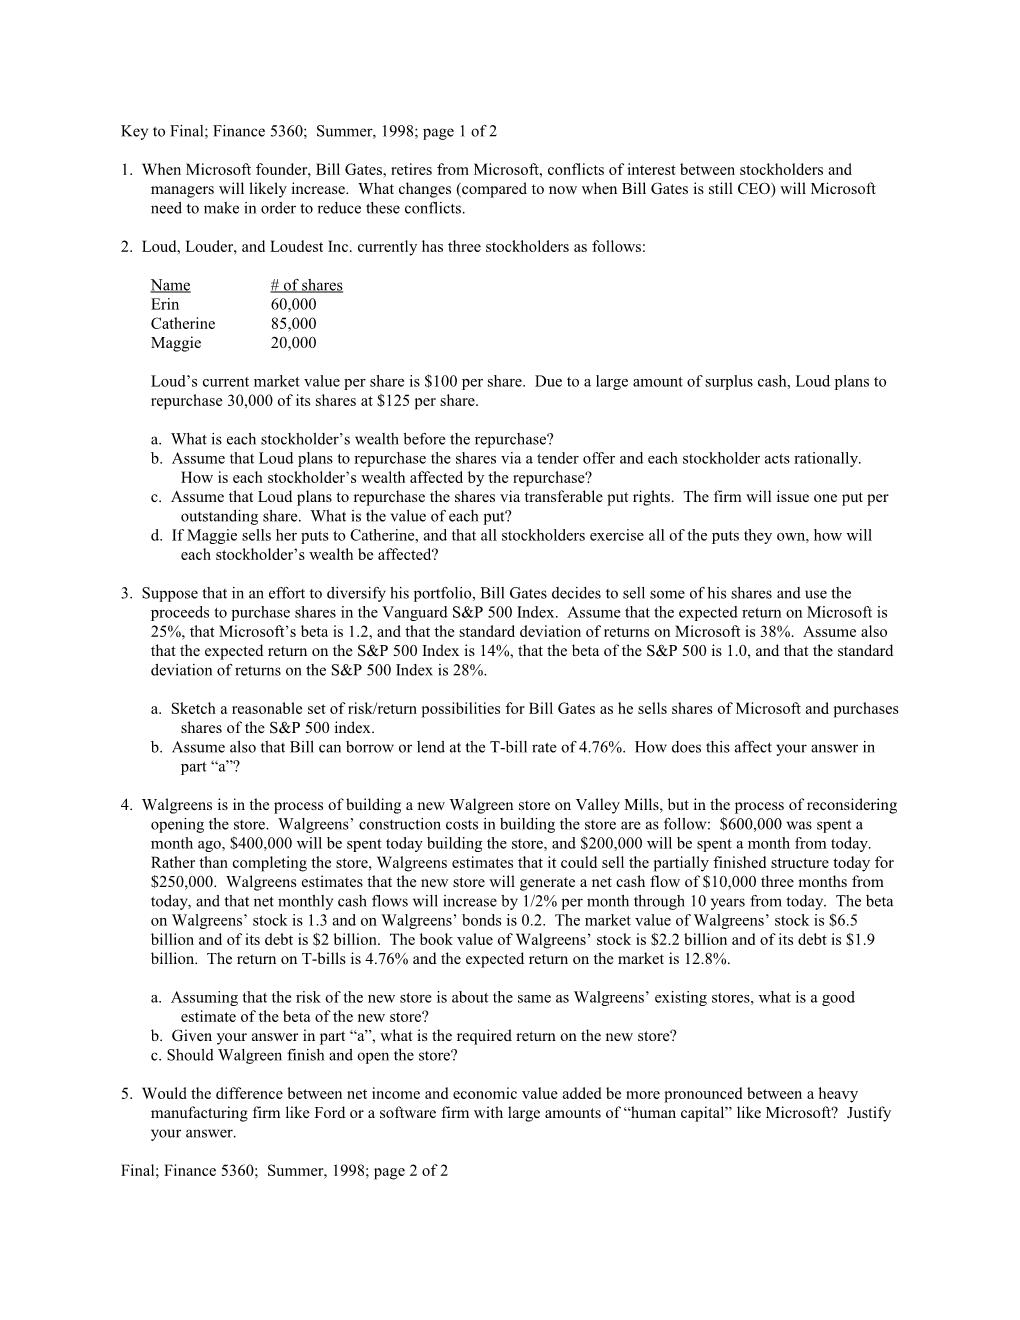 Key to Final; Finance 5360; Summer, 1998; Page 1 of 2